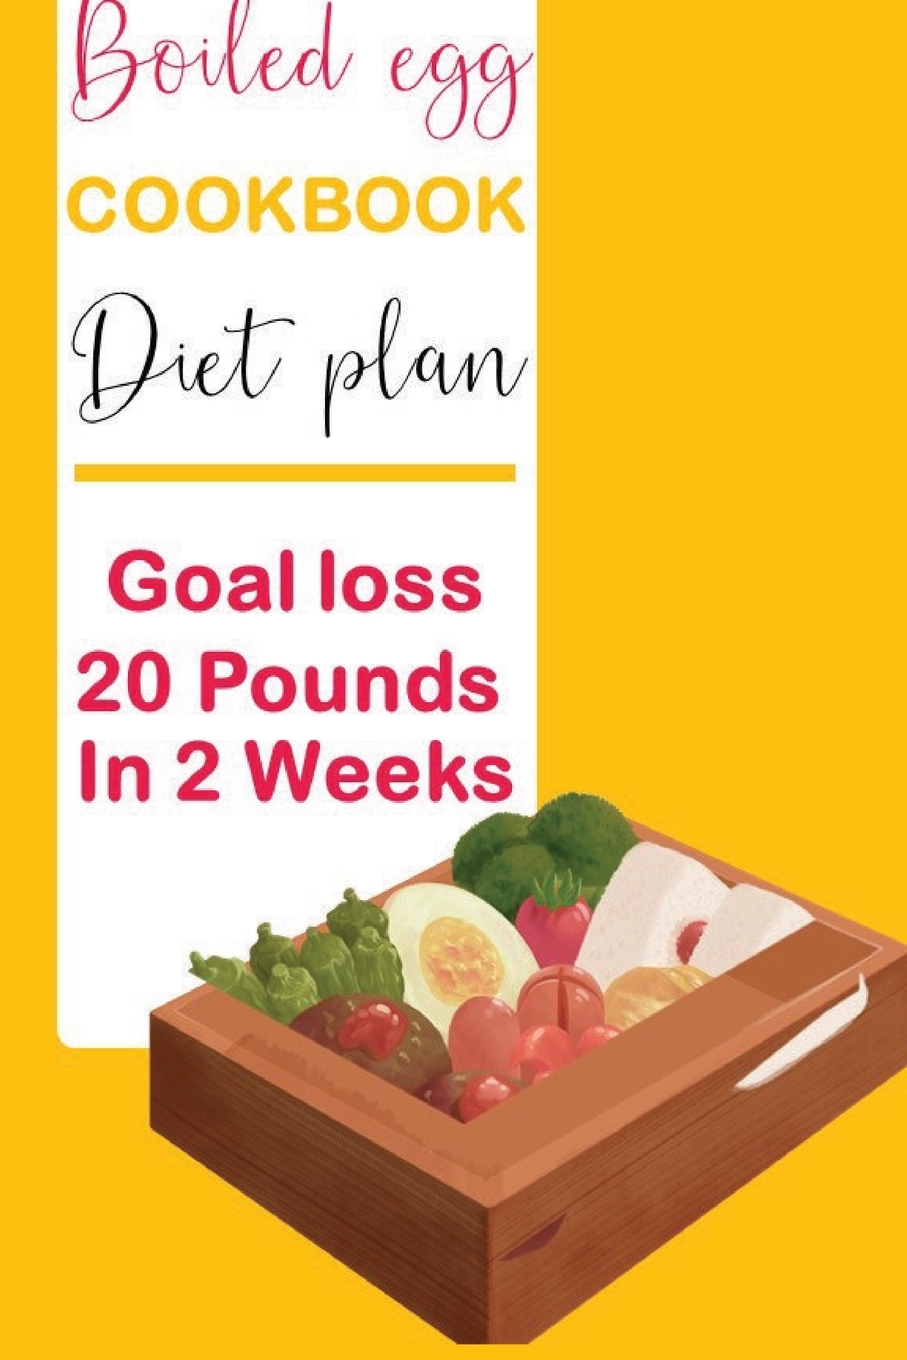 Boiled egg cookbook diet plan Goal loss 20 Pounds in 2 Weeks books on